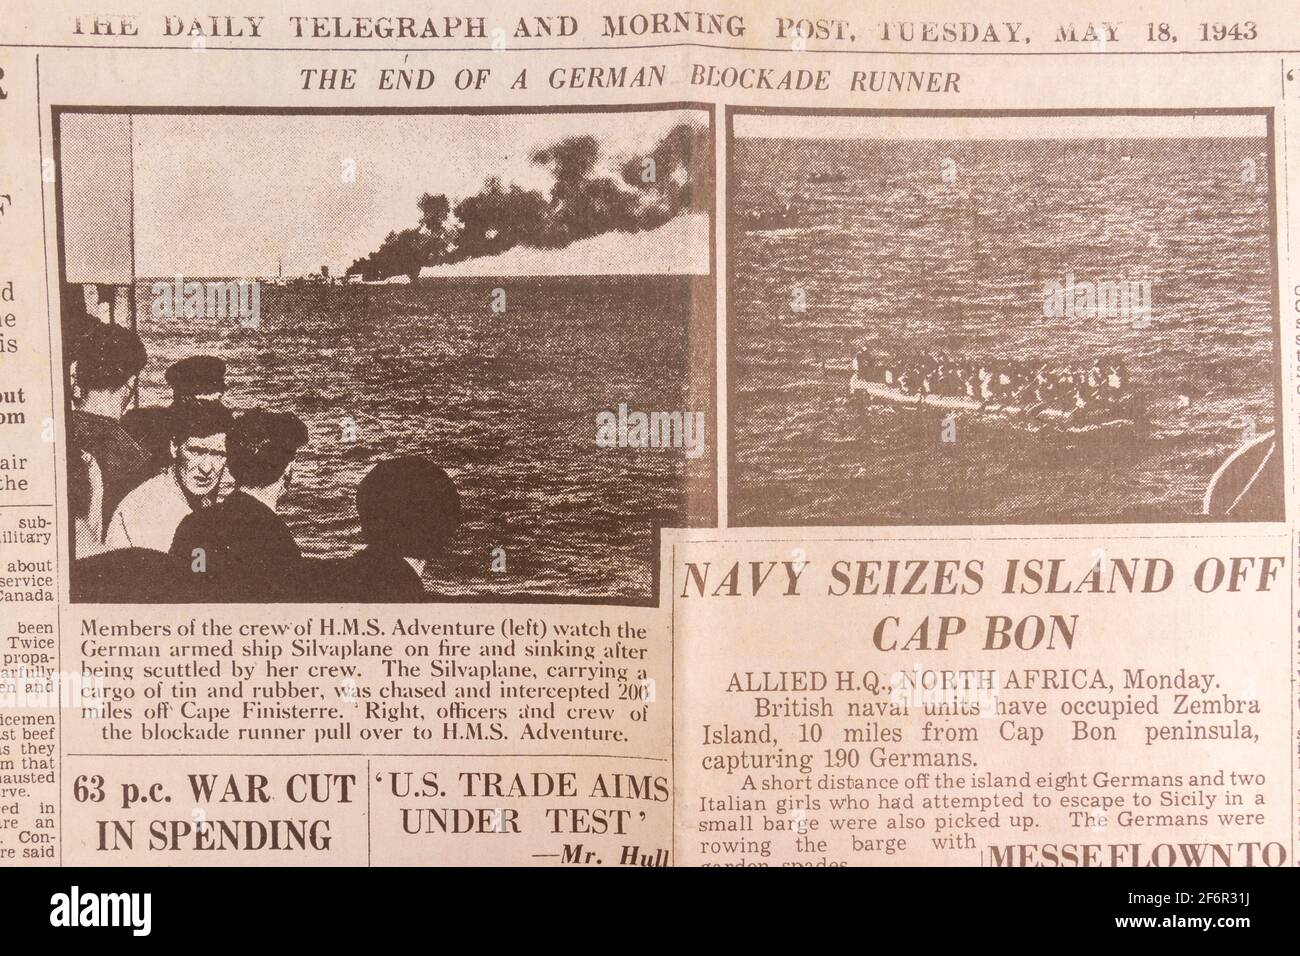 German blockade runner photos and story in the Daily Telegraph (replica), 18th May 1943, the day after the Dam Busters raid. Stock Photo